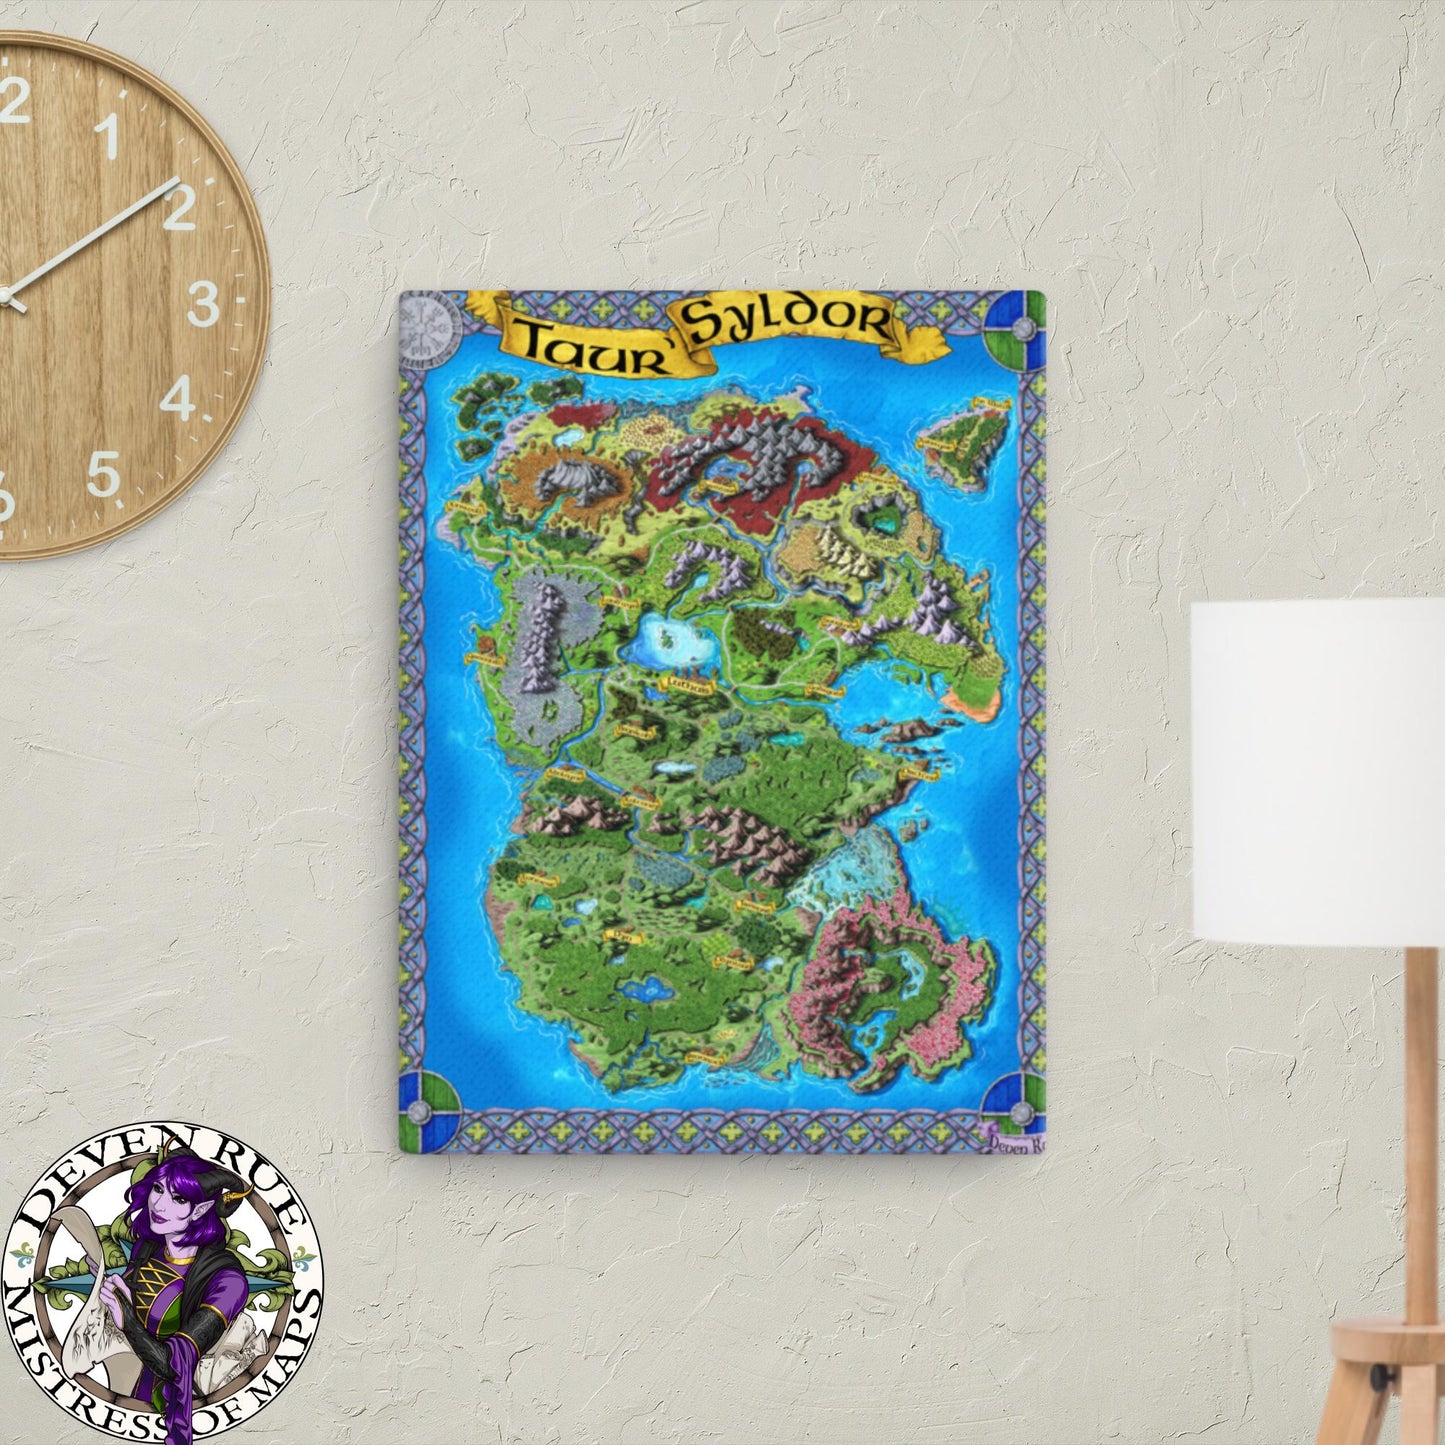 A 12" by 16" canvas print of the color Taur'Syldor map by Deven Rue.